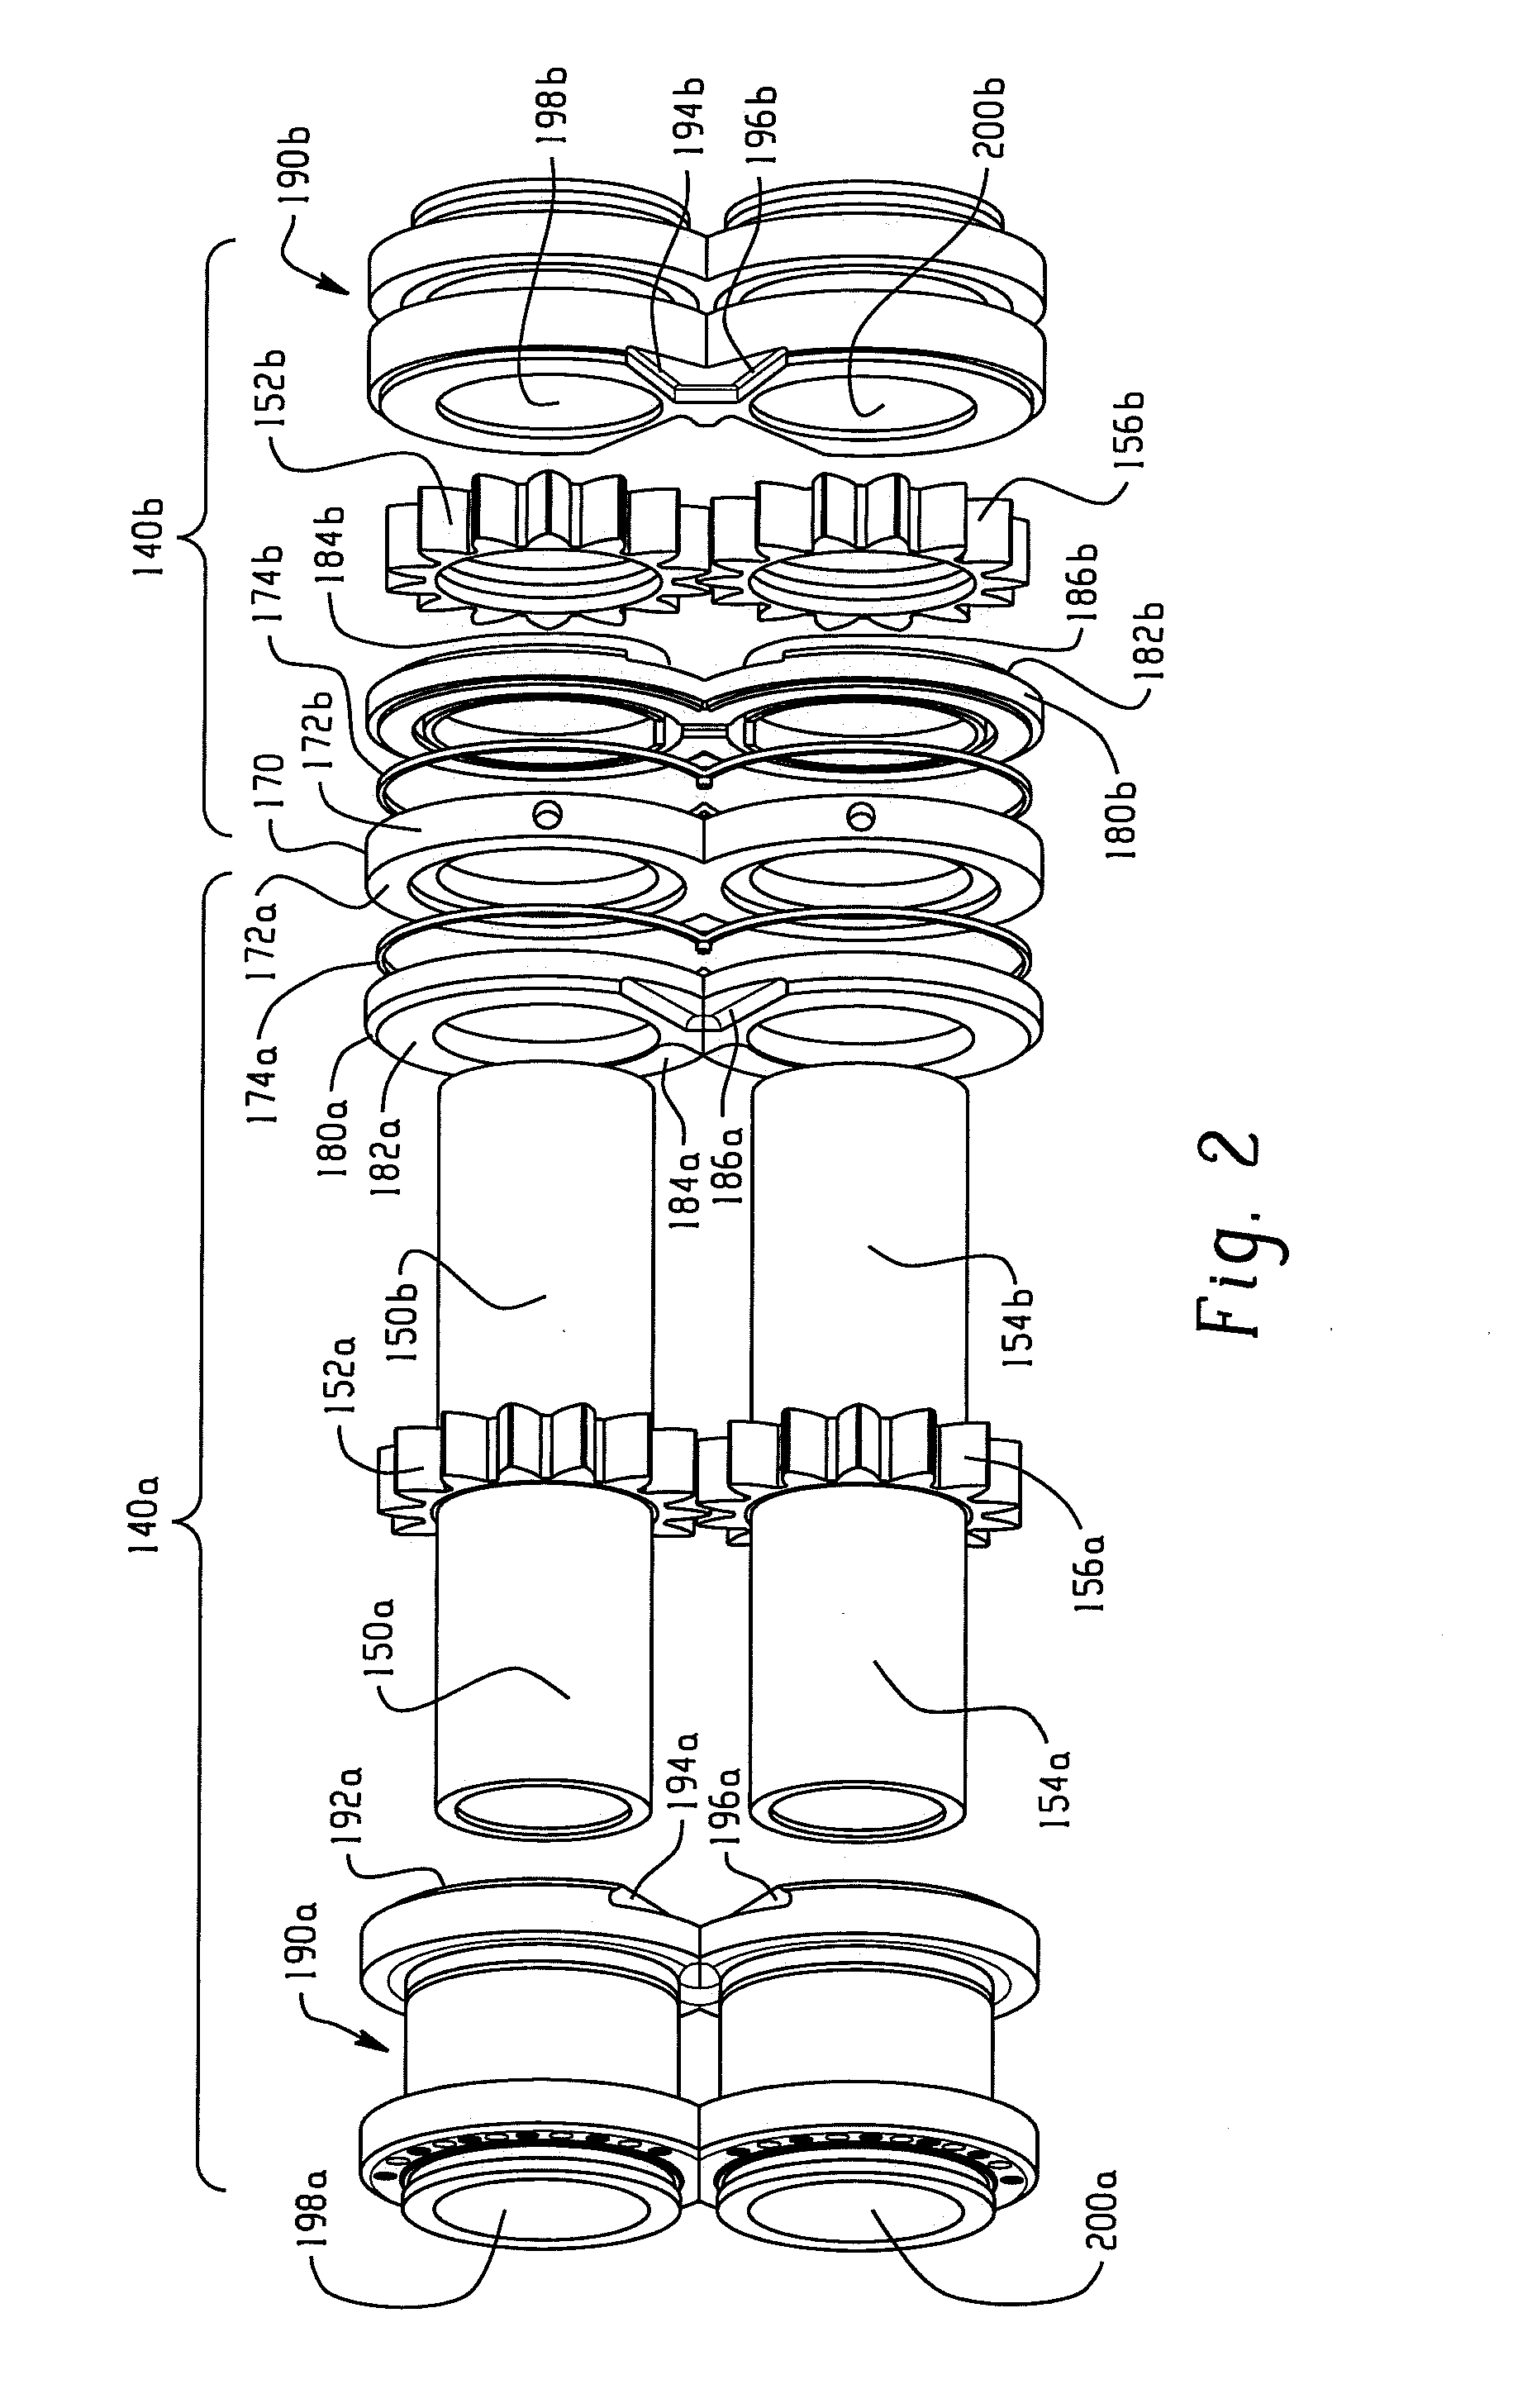 Aircraft main engine fuel pump with multiple gear stages using shared journals